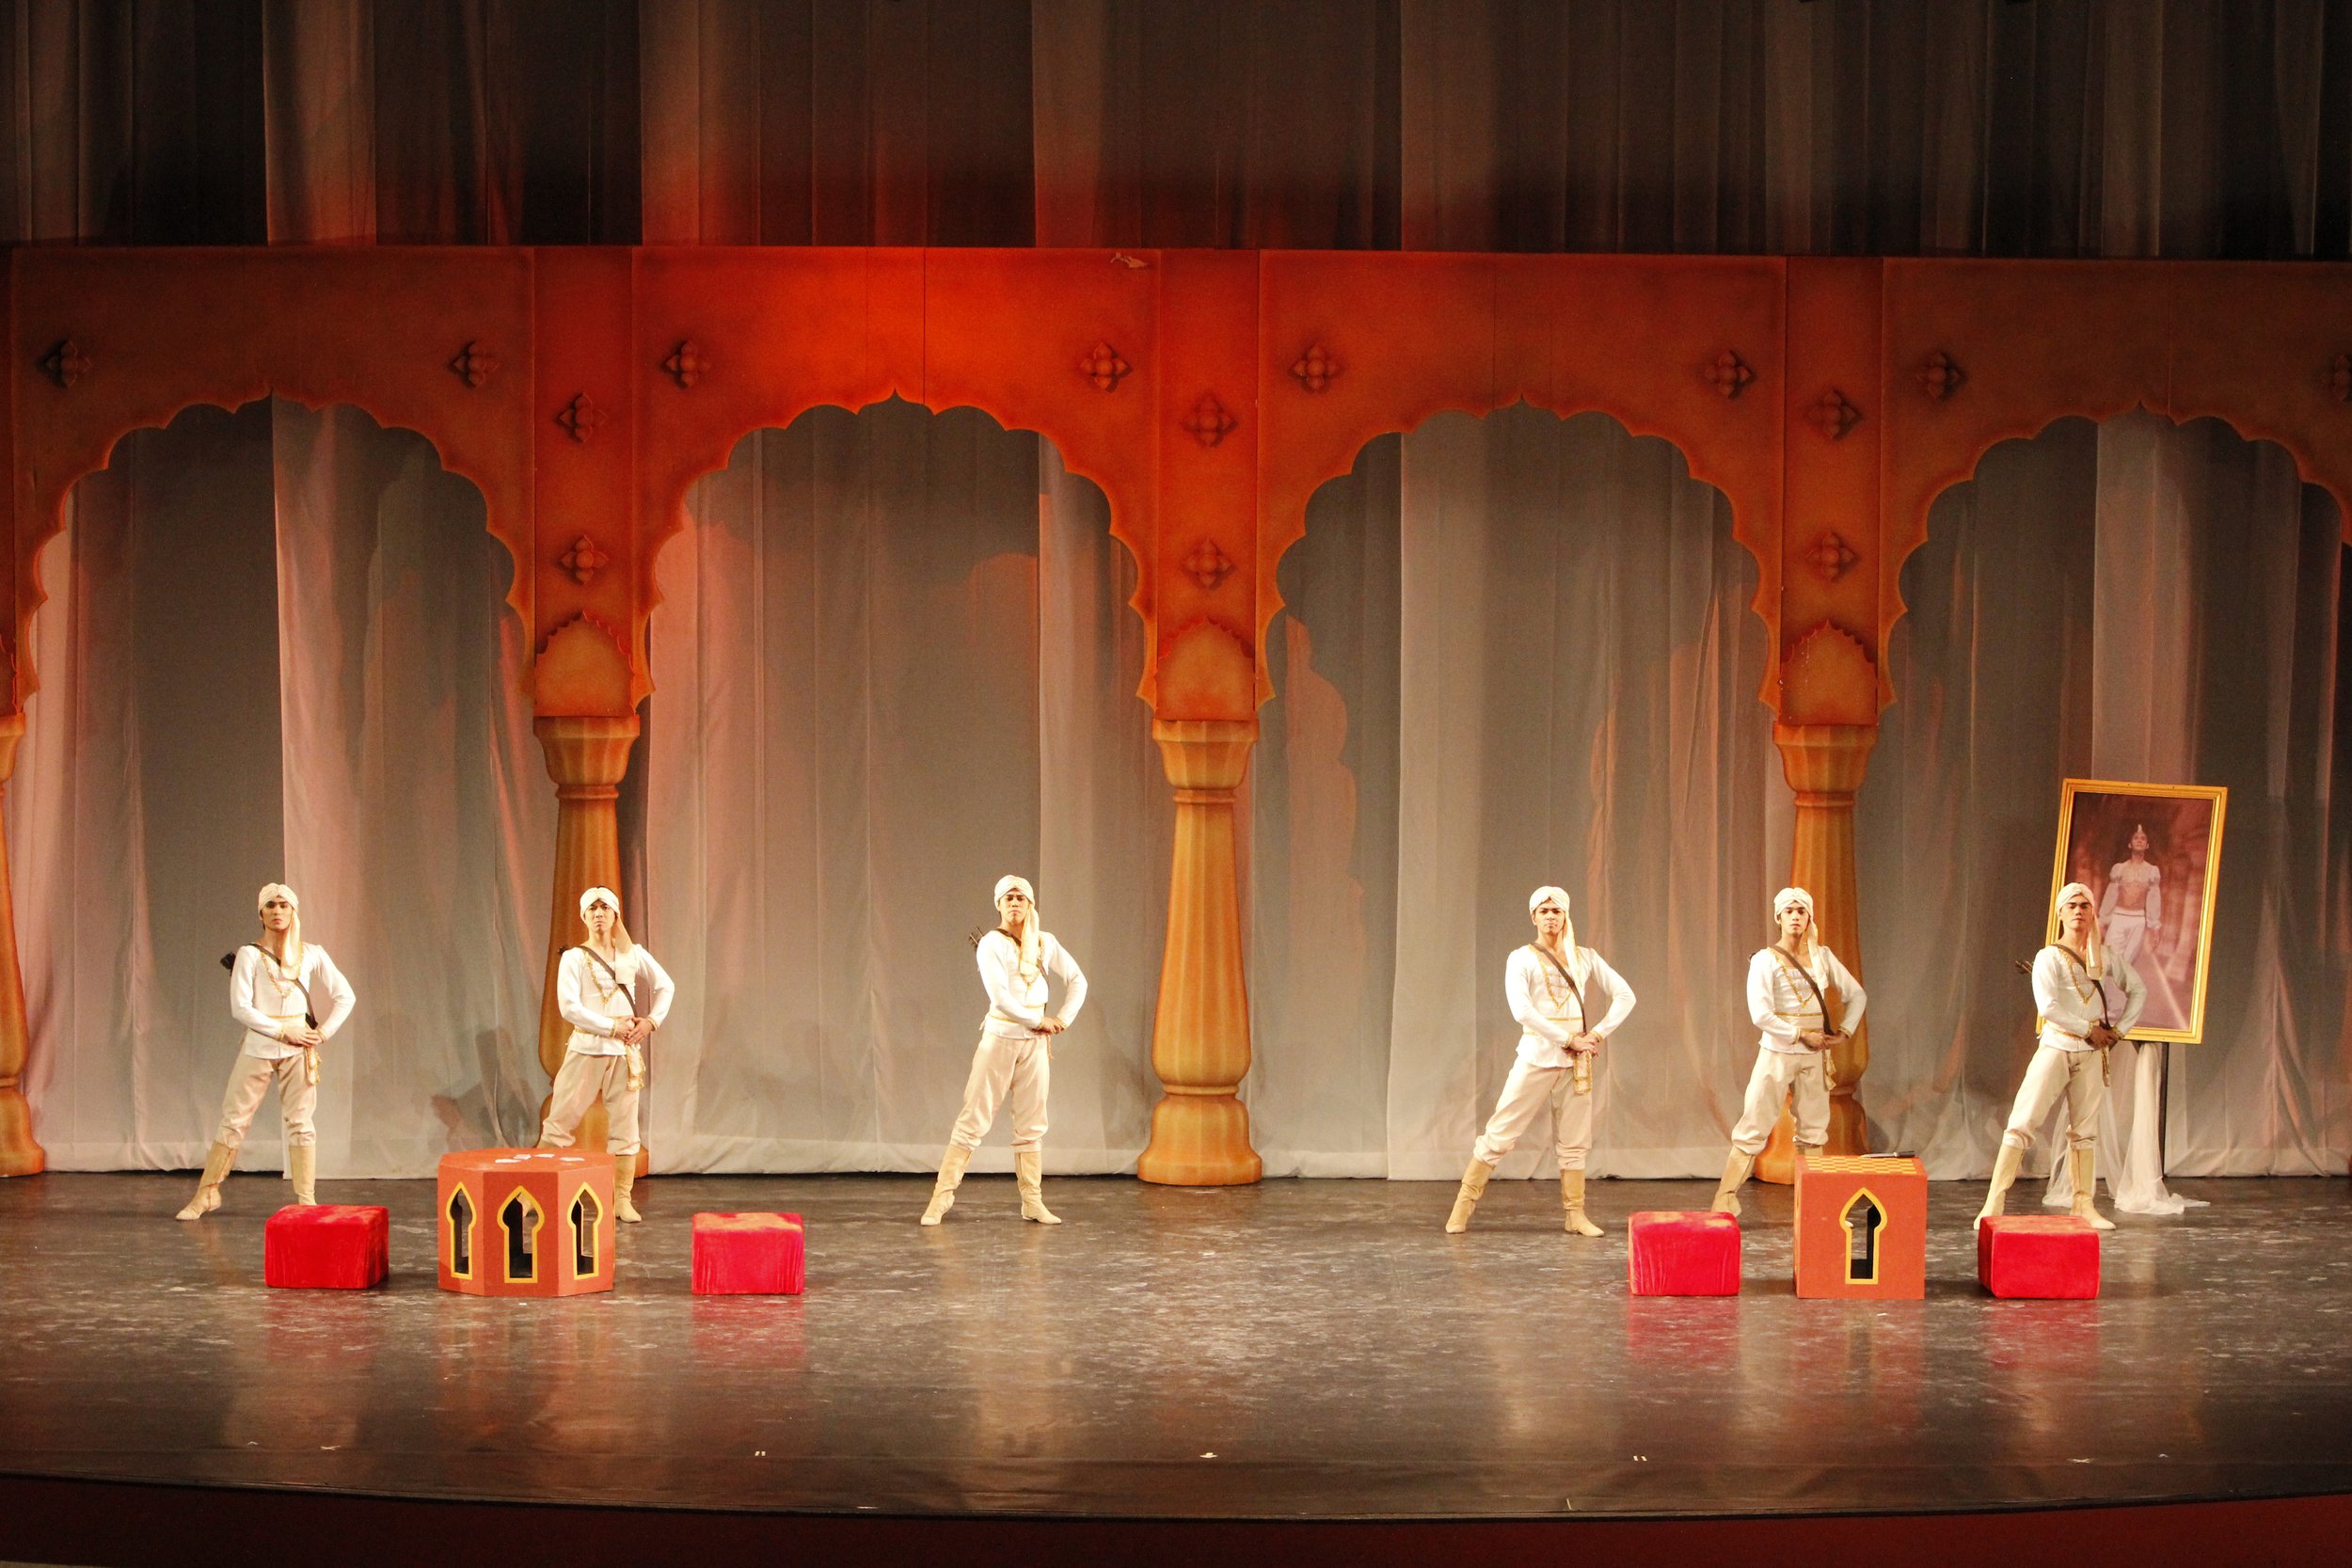    In the 2013 staging of  La Bayadere,  soldiers stand guard at the palace room where Gamzatti is shown a portrait of Solor and falls for him, not knowing that he has already pledged his love for Nikiya before the eternal flame.&nbsp;   